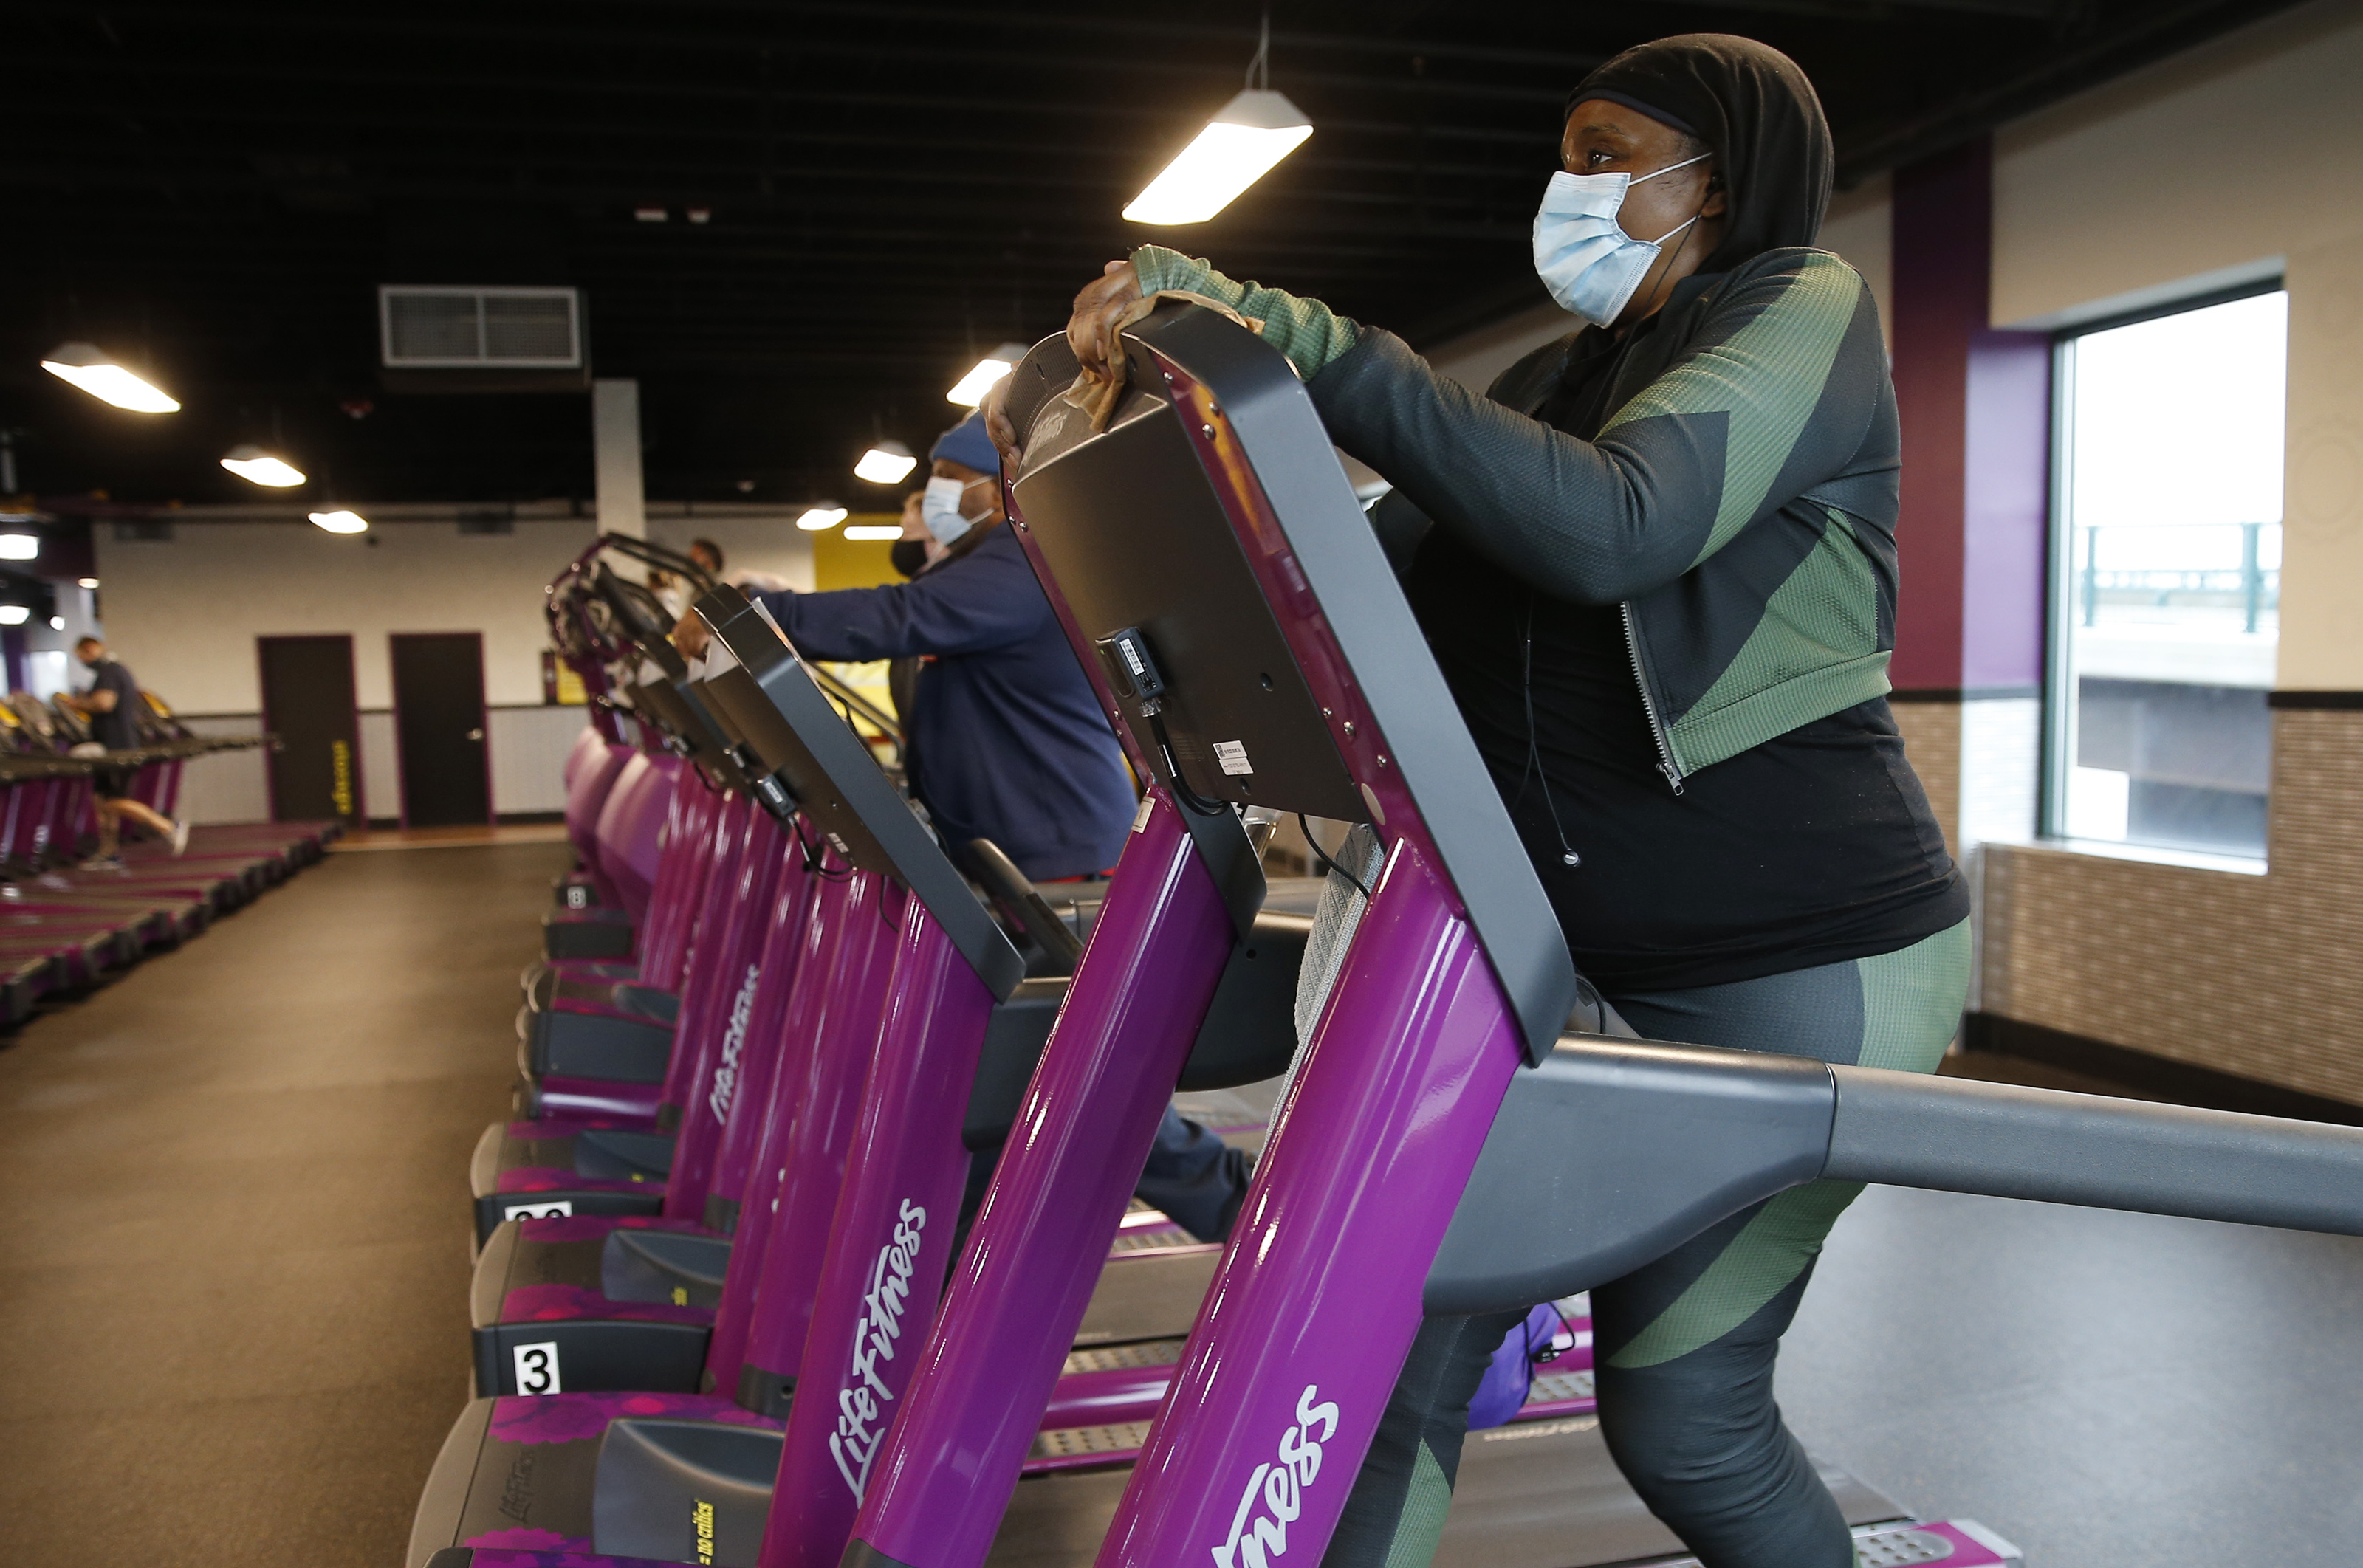 A person works out at Planet Fitness in Boston's Dorchester neighborhood on Feb. 1, 2021. (Photo by Jessica Rinaldi/The Boston Globe via Getty Images) (Boston Globe via Getty Images&mdash;2021 - The Boston Globe)